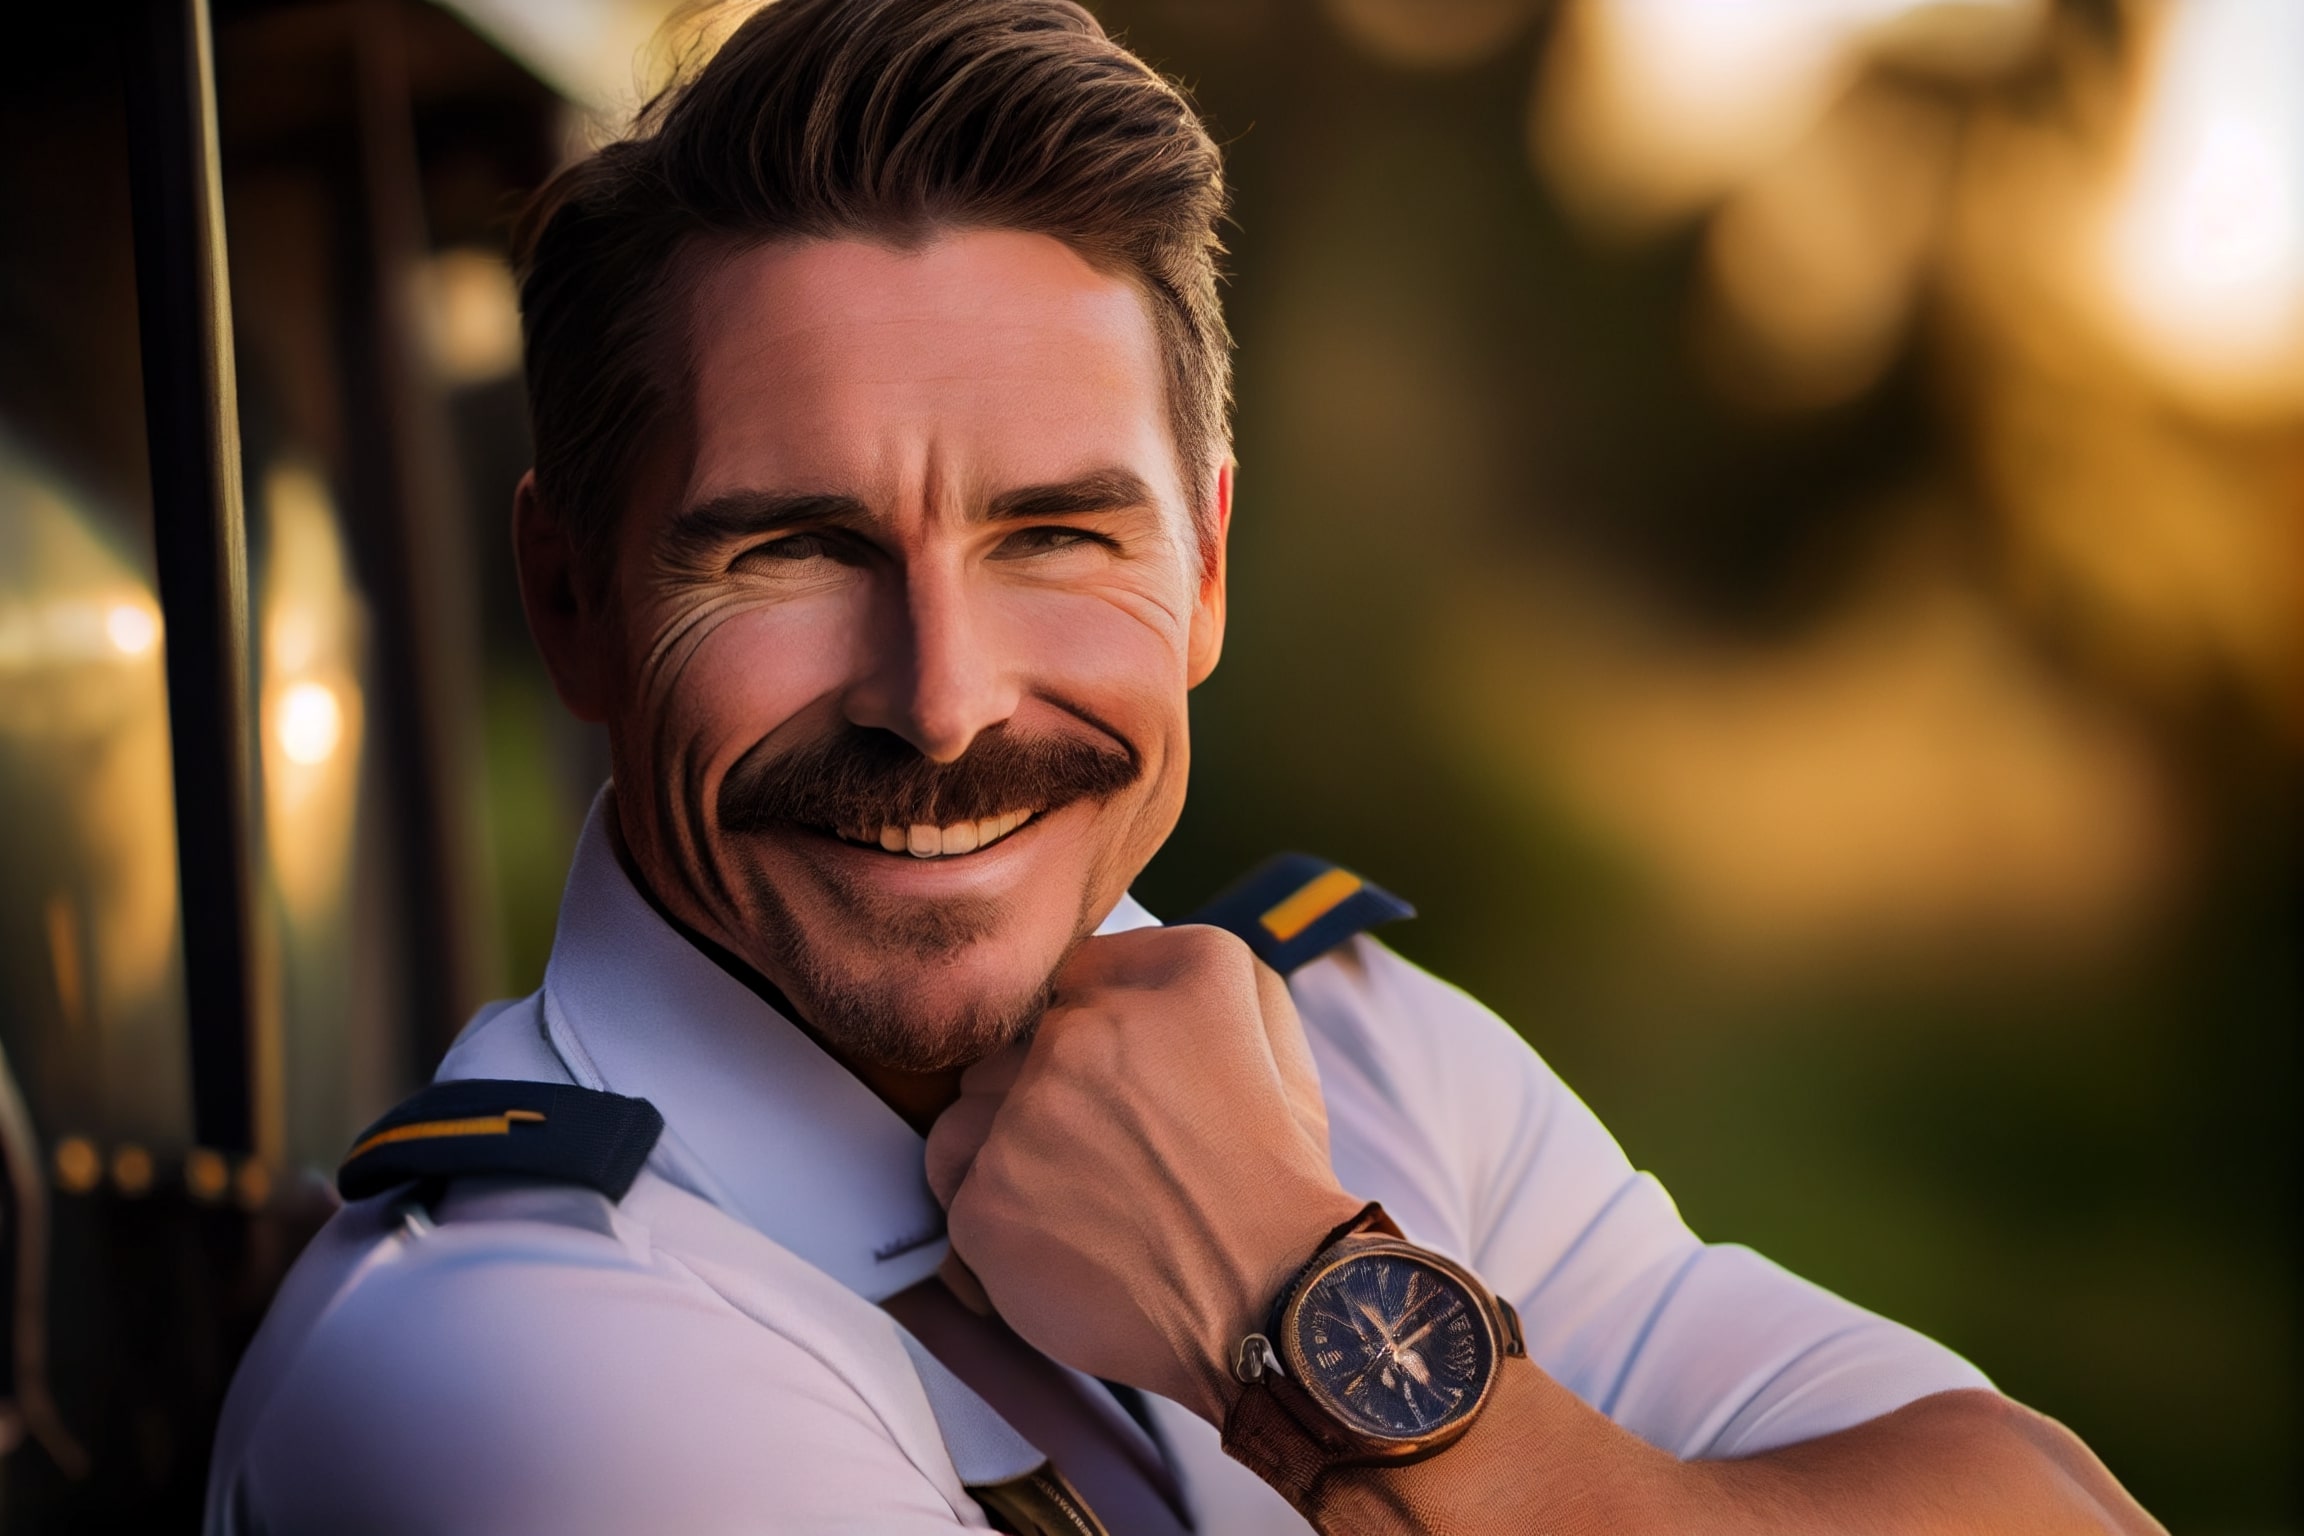 Man with a mustache and a watch on his wrist.